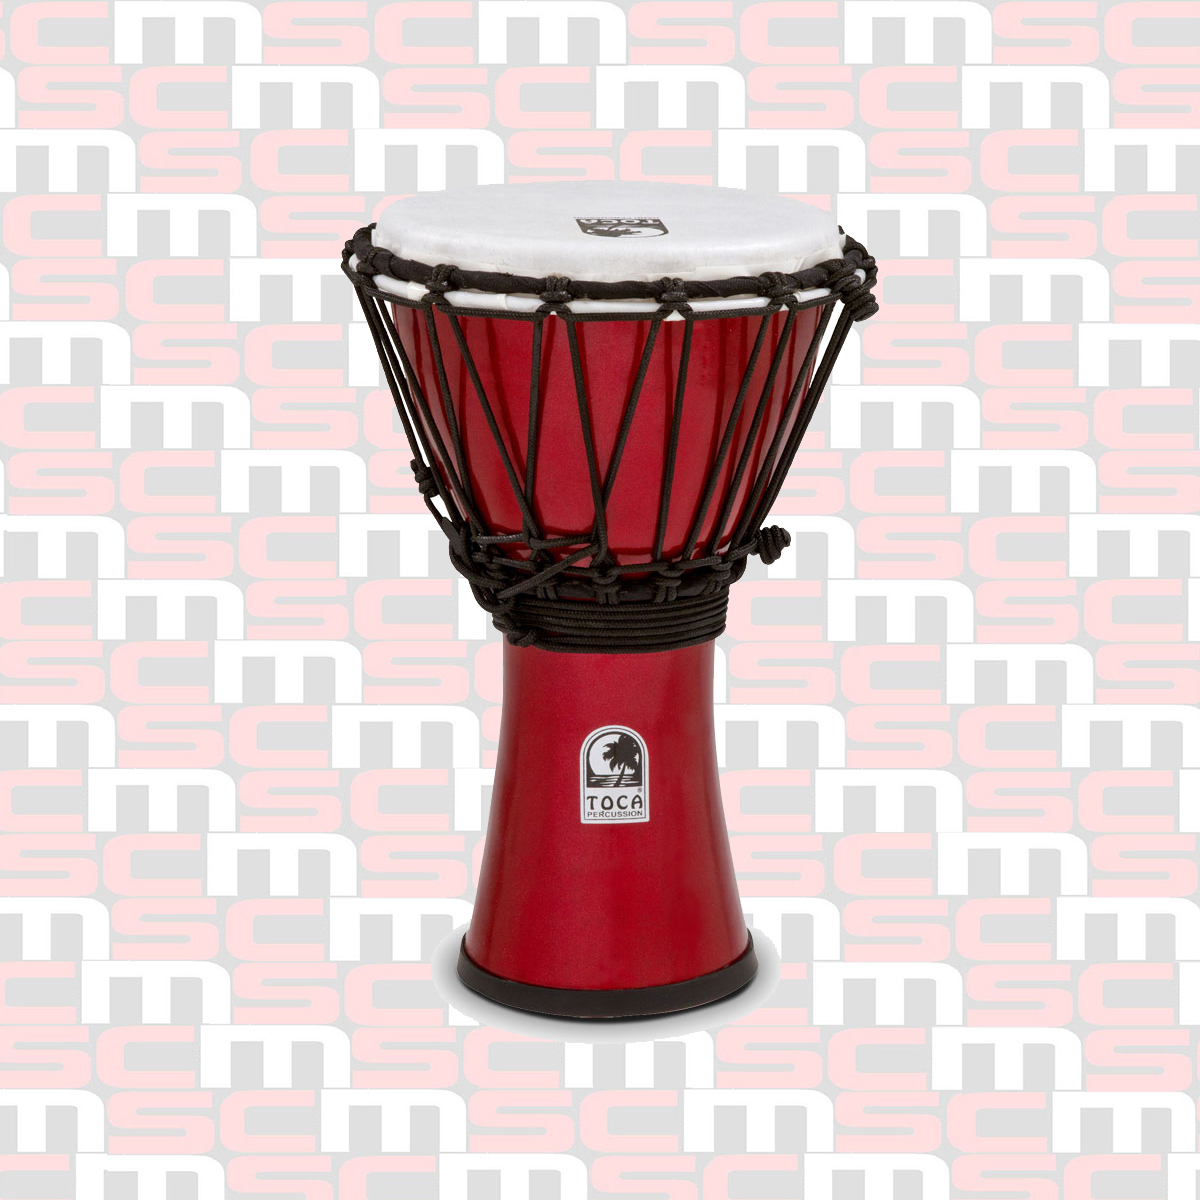 TOCA 7" FREESTYLE COLORSOUND DJEMBE - METALLIC RED finish